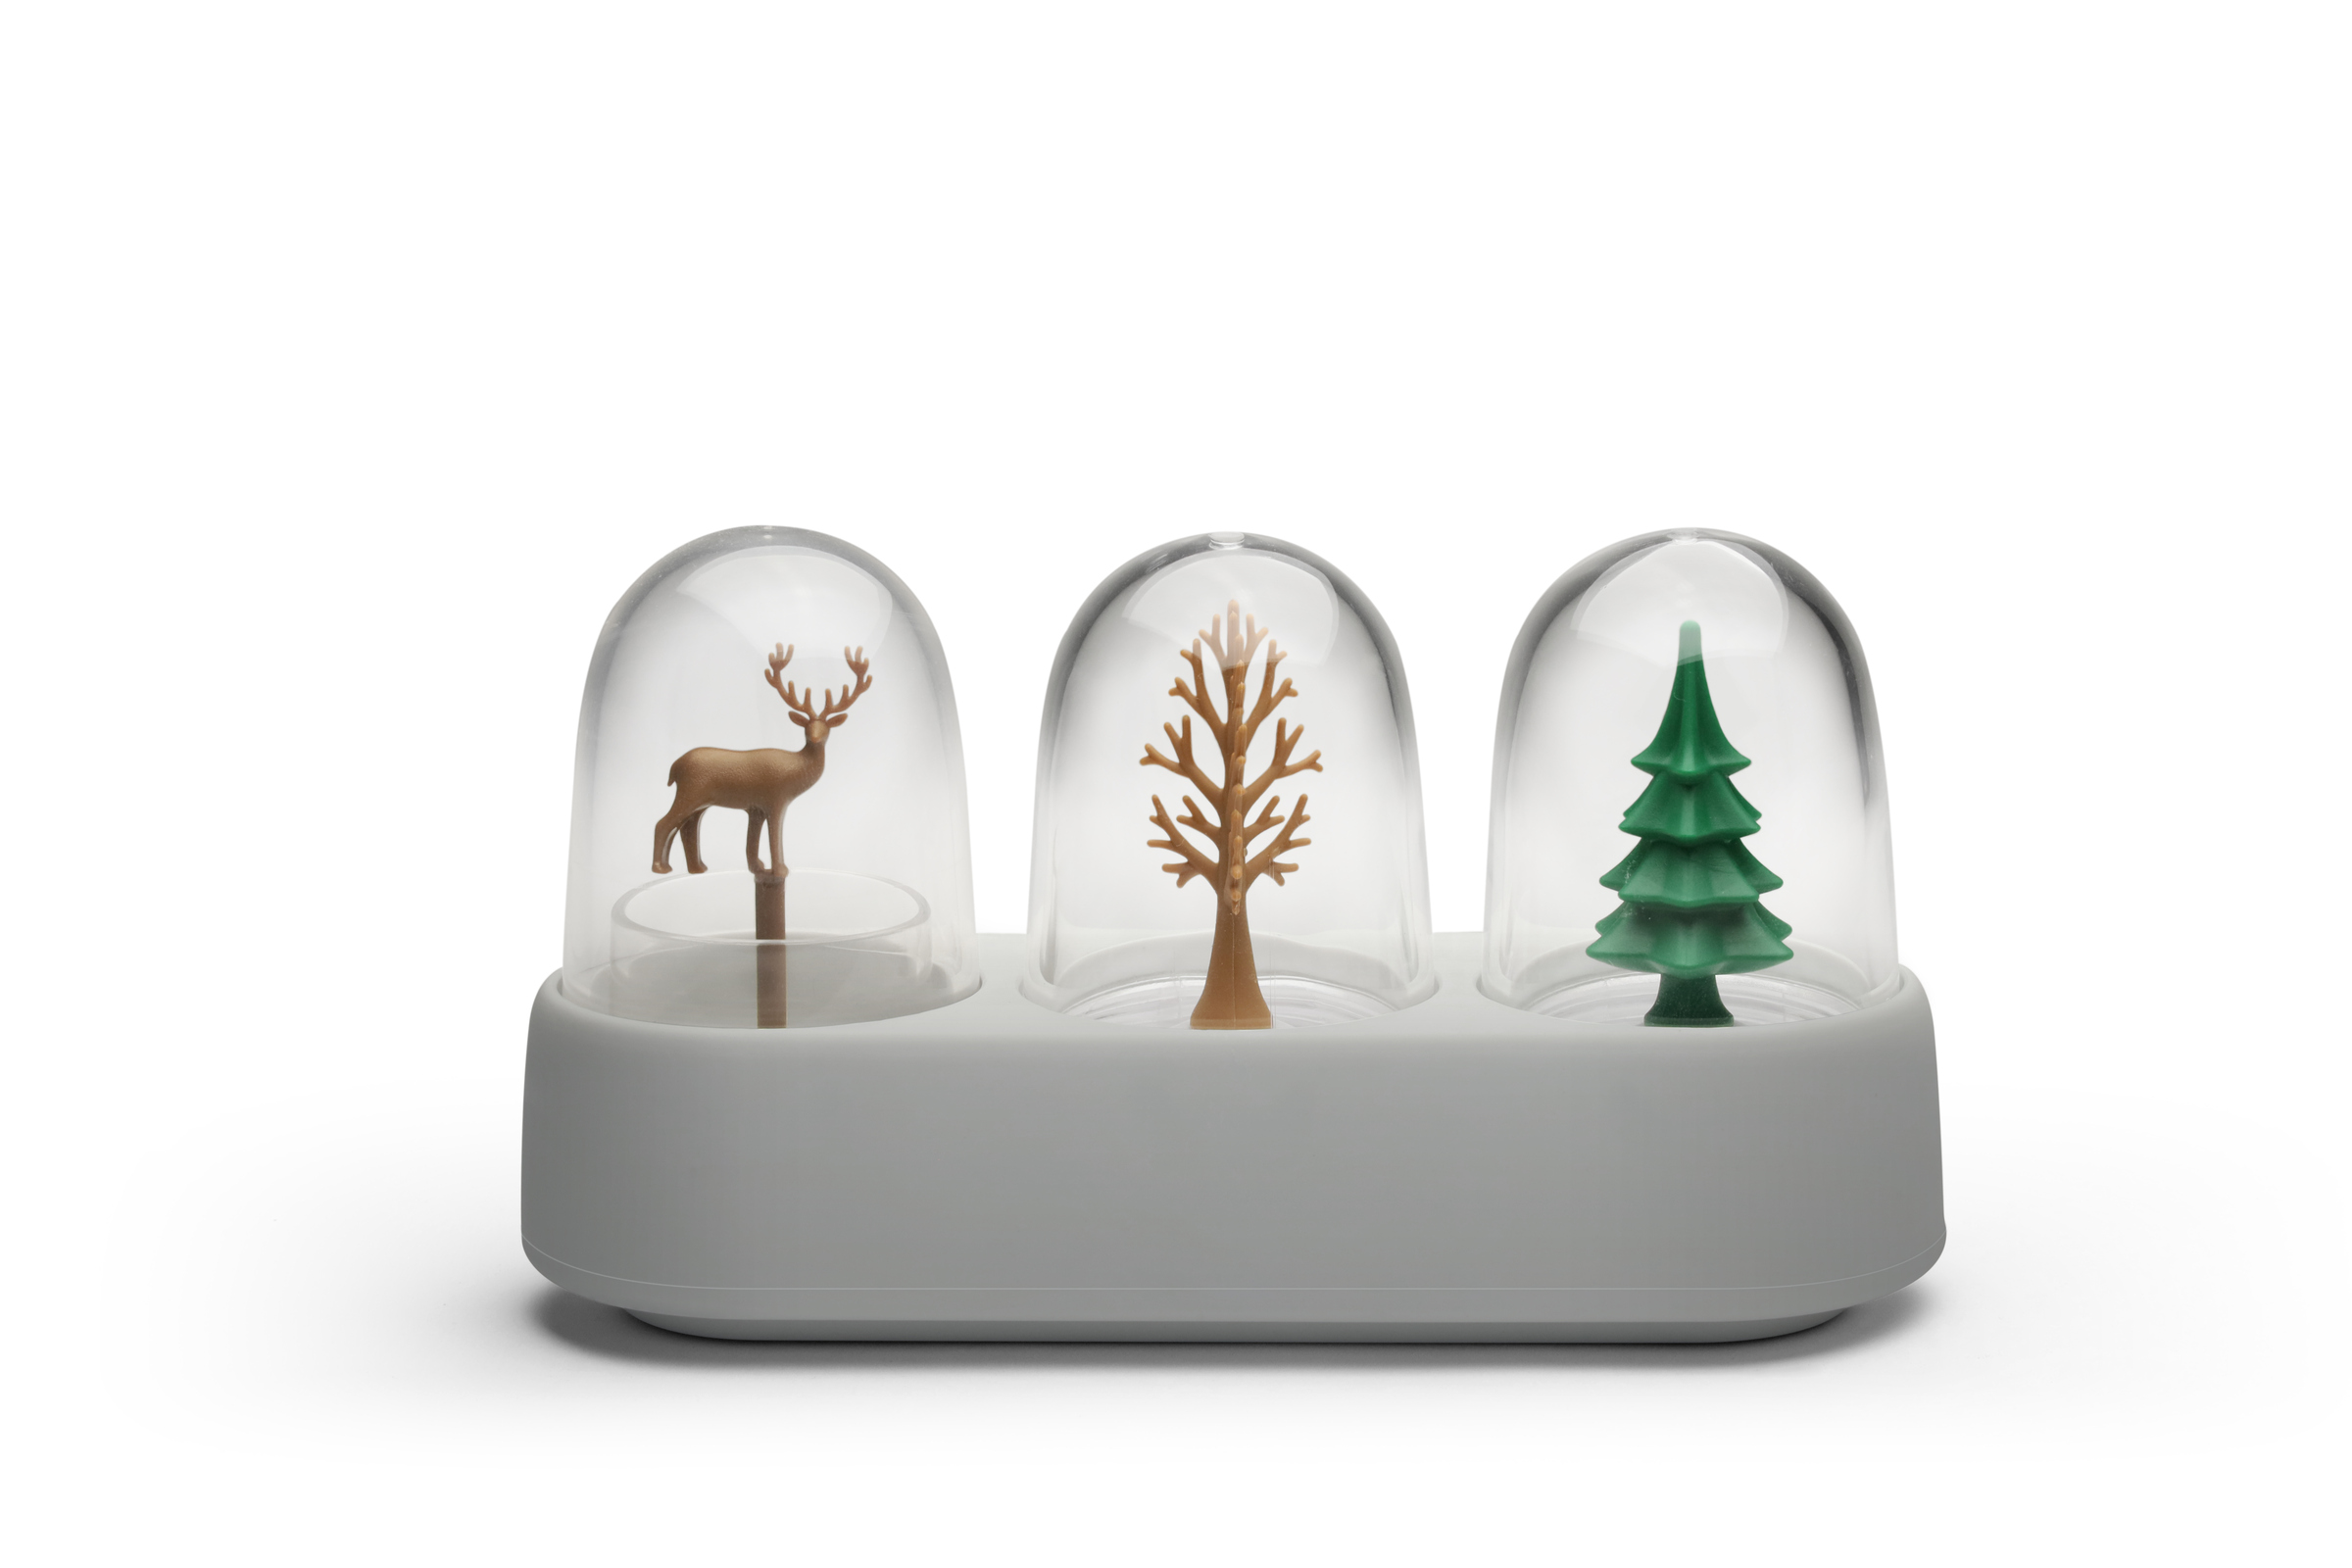 QL10382-CL-GY Forest Ecology Toothpick Holder White Background (1).jpg